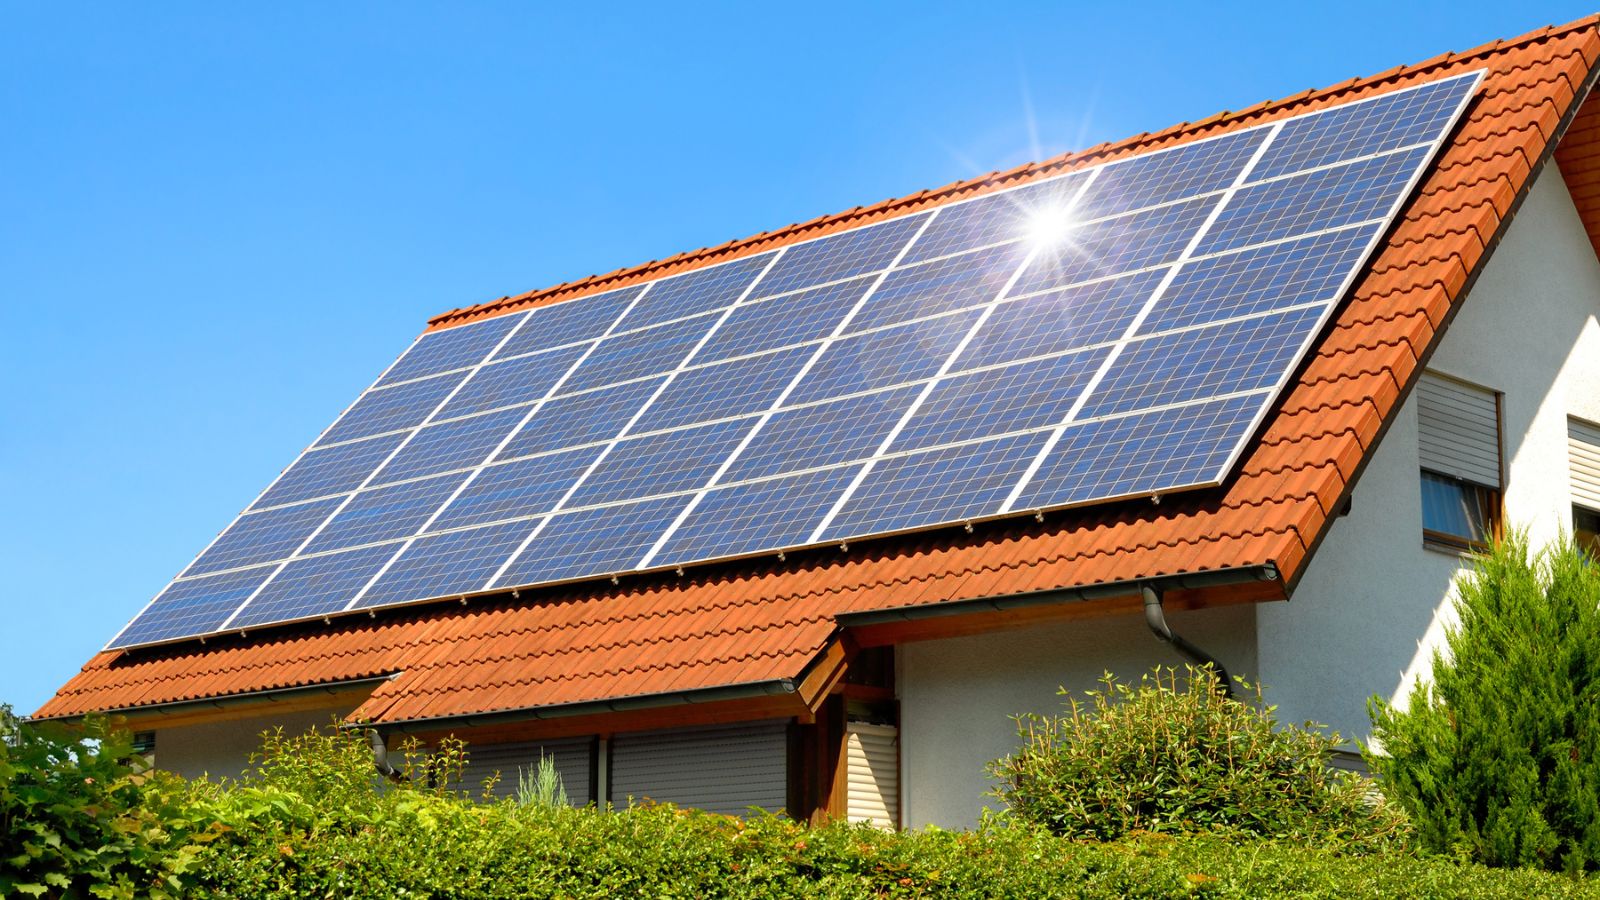 Are Solar Panels Worth the Cost for Your Home? Start With This Guide